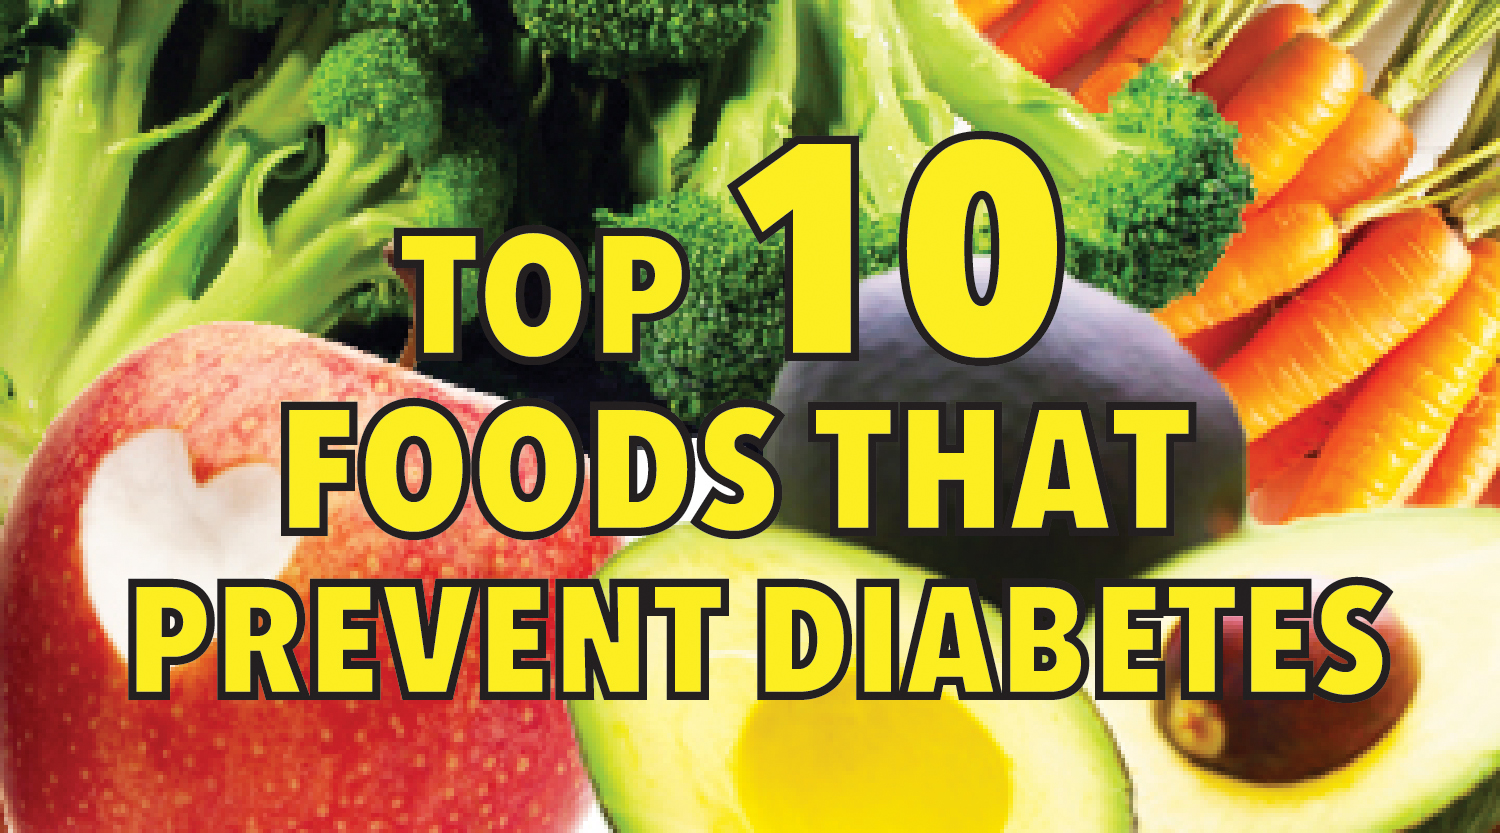 Which foods can prevent diabetes?